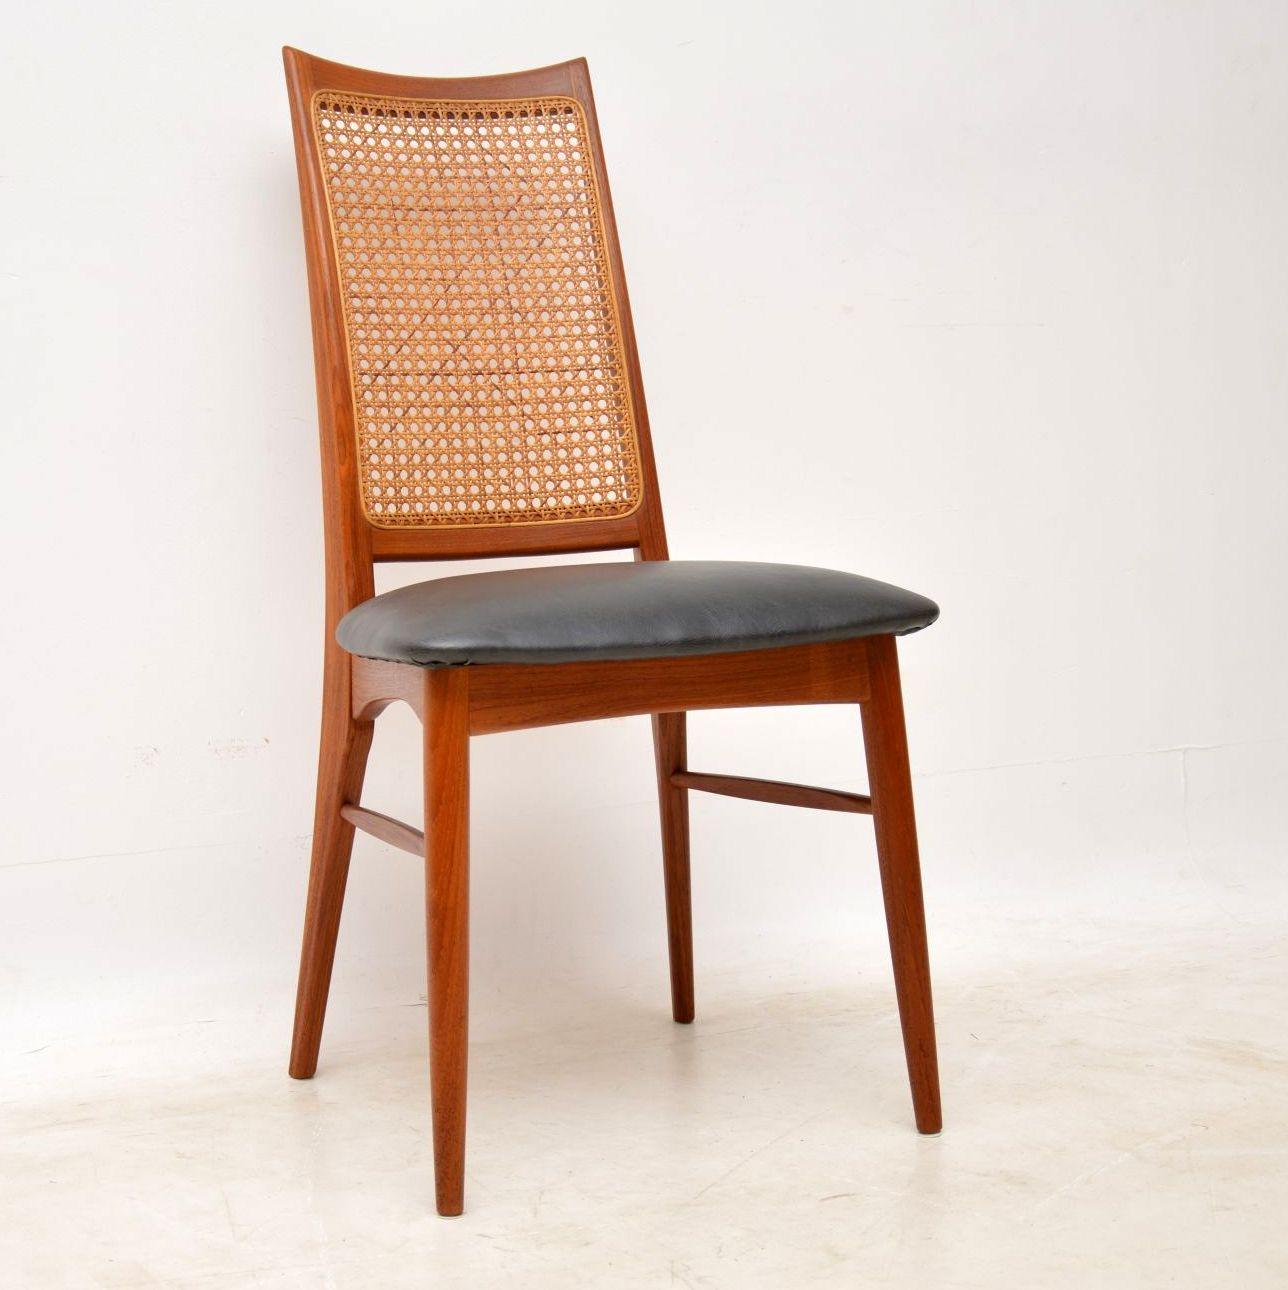 A beautiful and very rare set of Danish teak vintage dining chairs, these were designed by Niels Koefoed, they were made in Denmark by Koefoeds Hornslet in the 1960s. They are of amazing quality, with stunning rattan backs and a beautiful sculptural